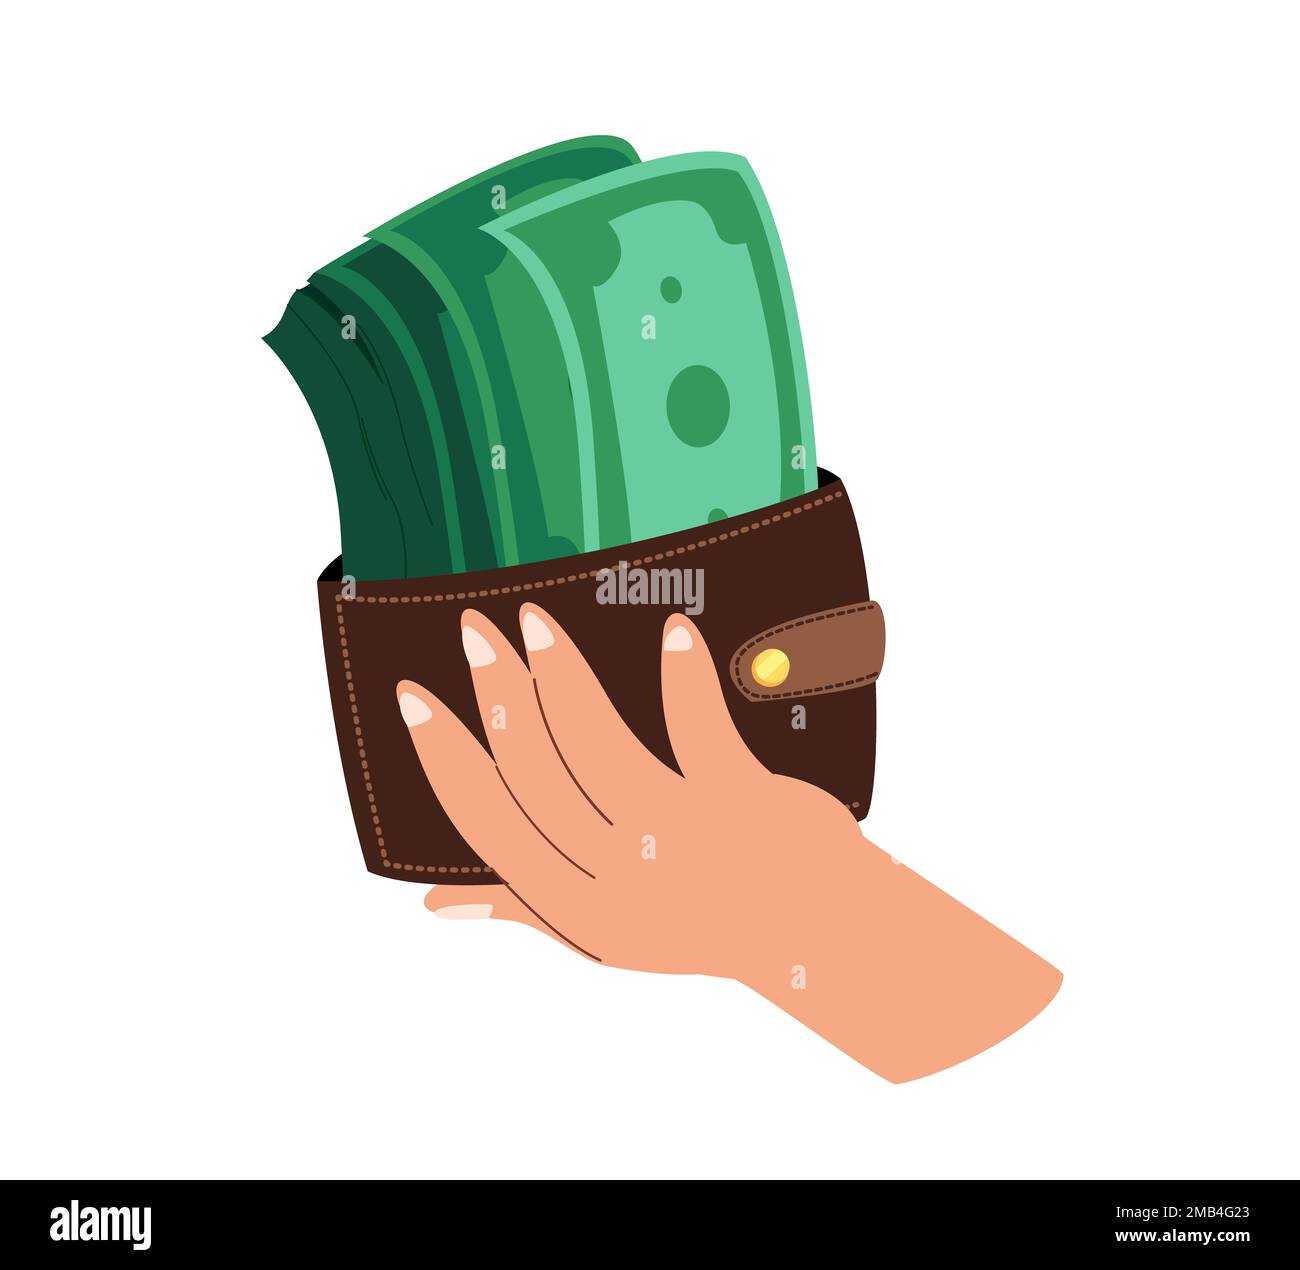 Hand Palm holding wallet with pile of money,Green Bills,Notes.Cash money,Finance Accumulation.Deposit,Financial capital,wealth,profit,savings concept. Stock Photo